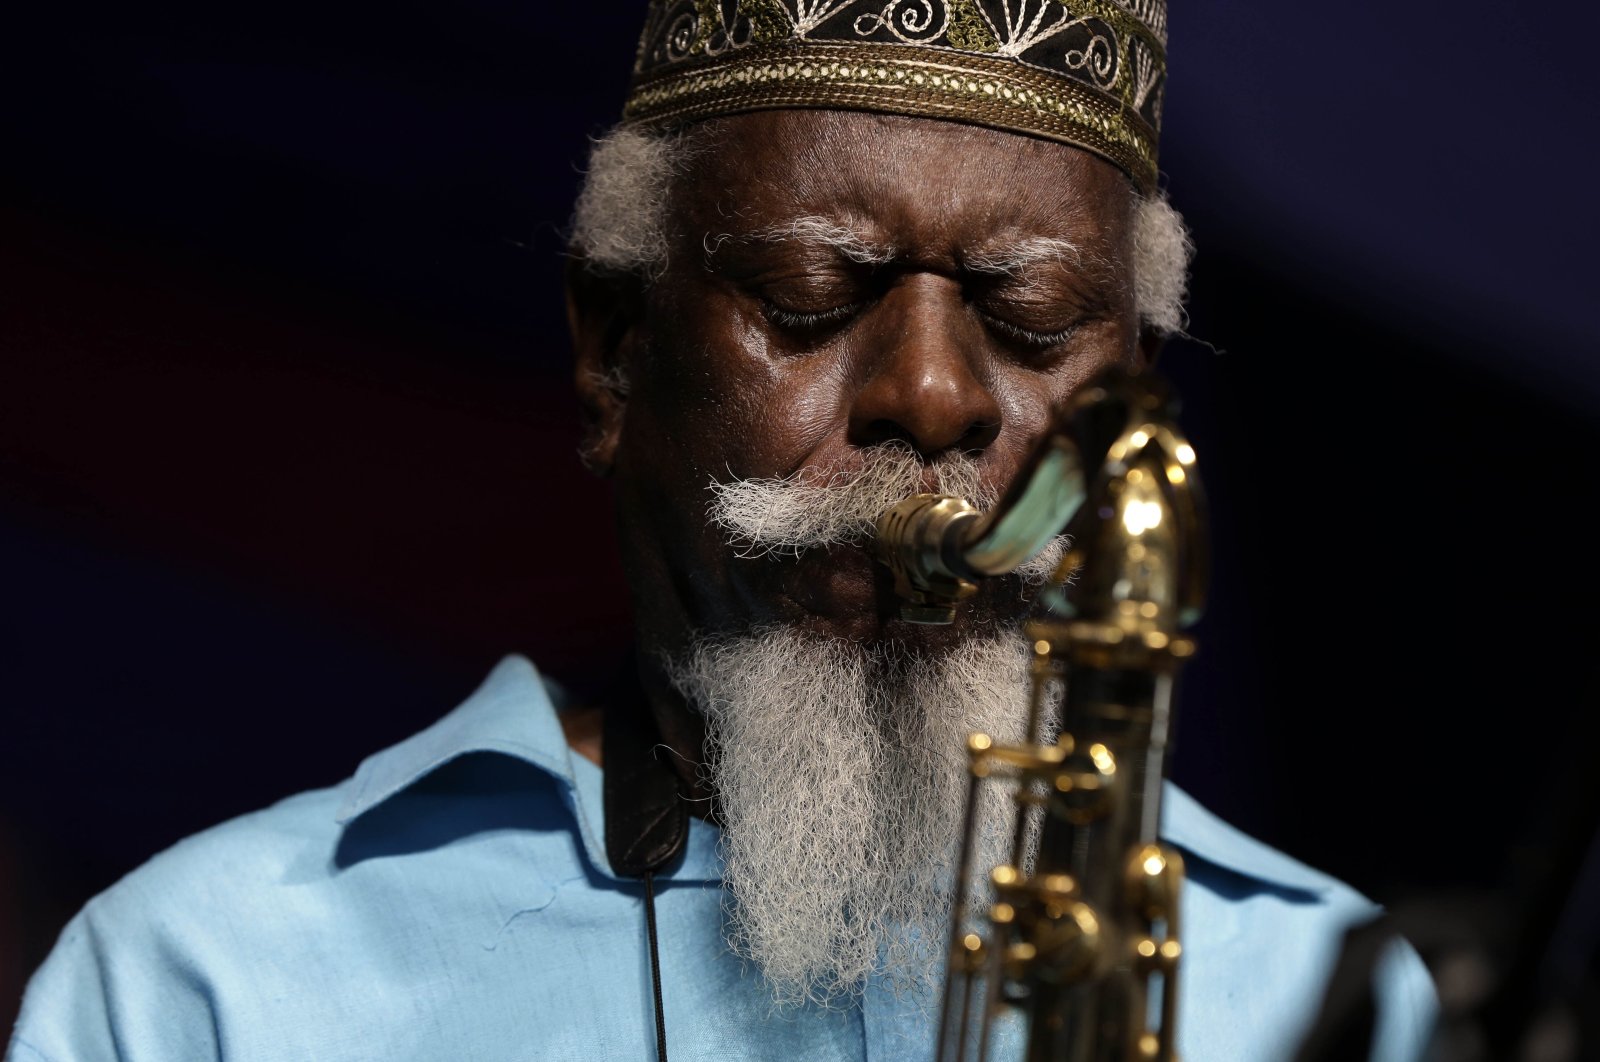 Jazz saxophonist Pharoah Sanders performs at the New Orleans Jazz and Heritage Festival in New Orleans, U.S., May 2, 2014. (AP Photo)